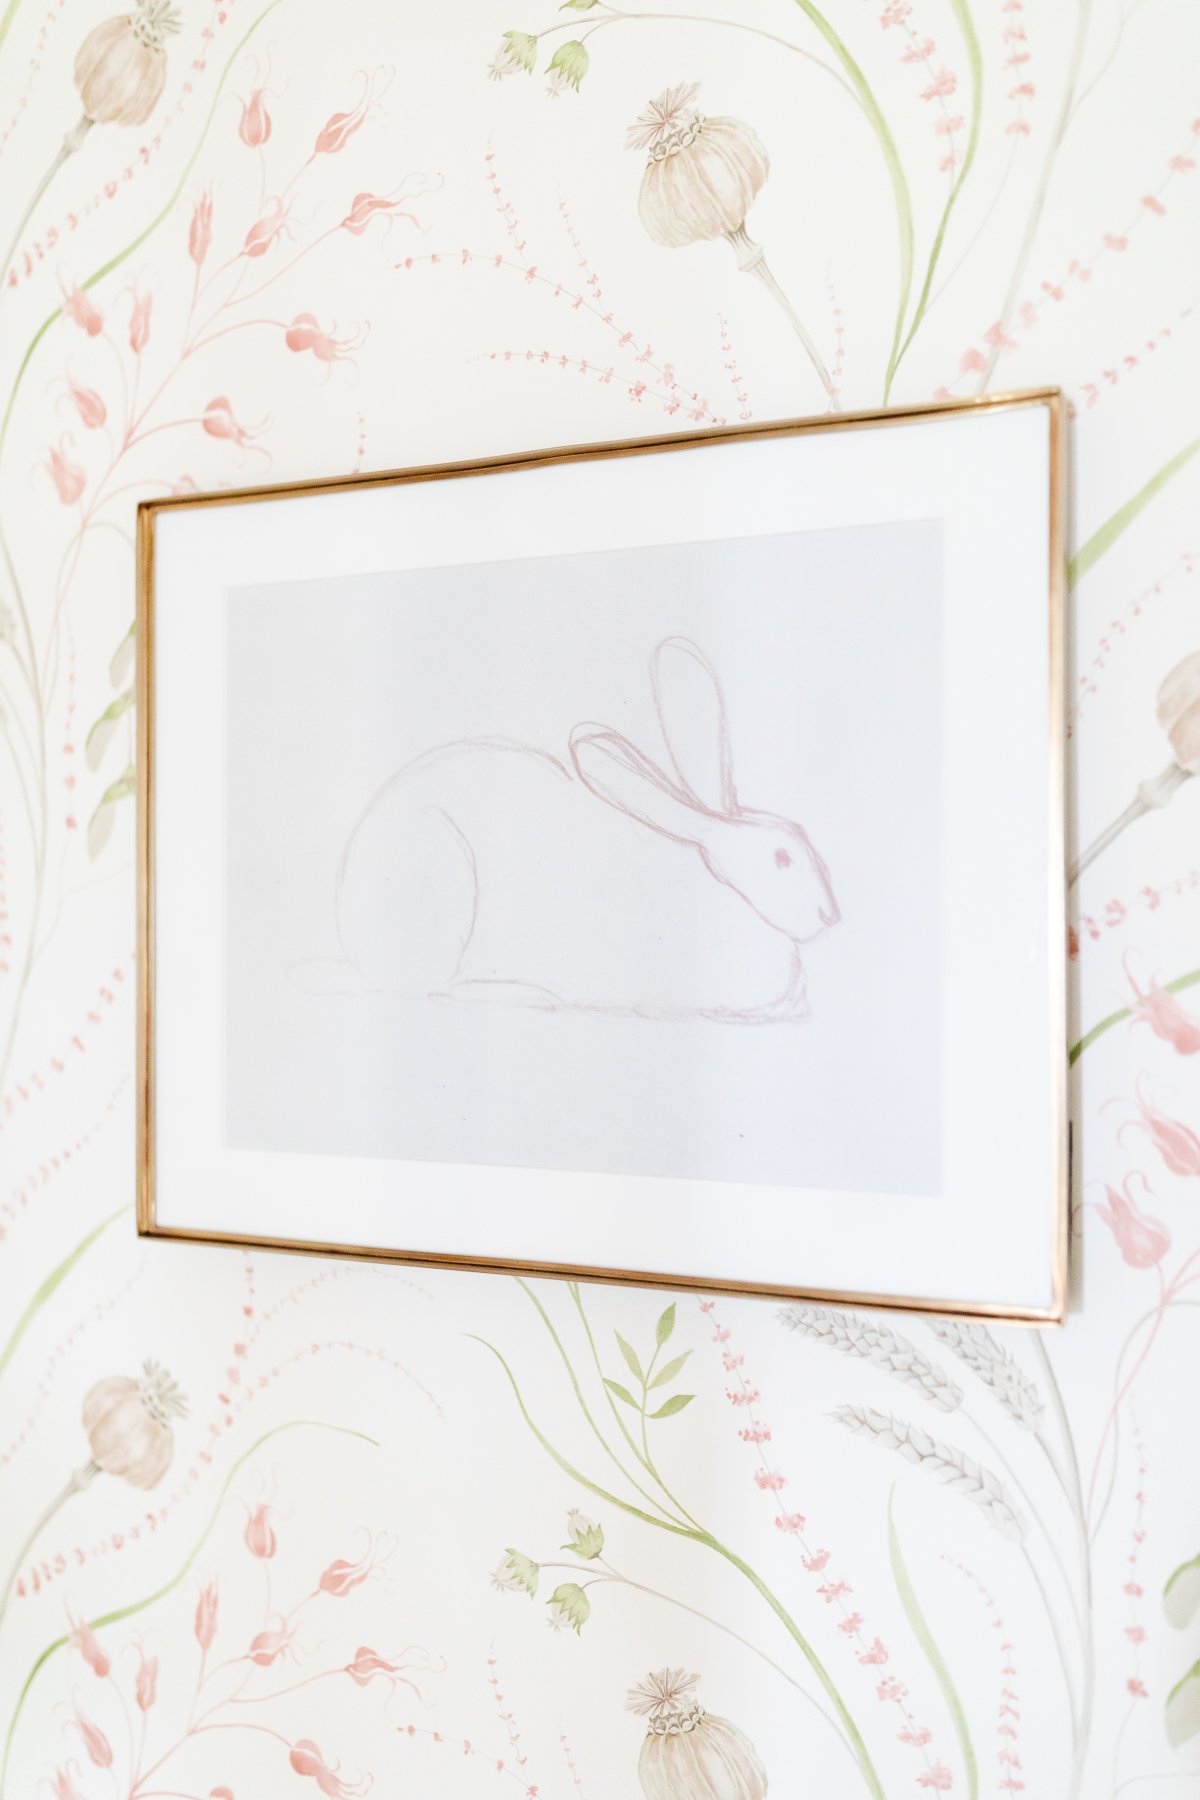 A framed drawing of a rabbit on a wall, sourced from Studio McGee's public domain art collection.